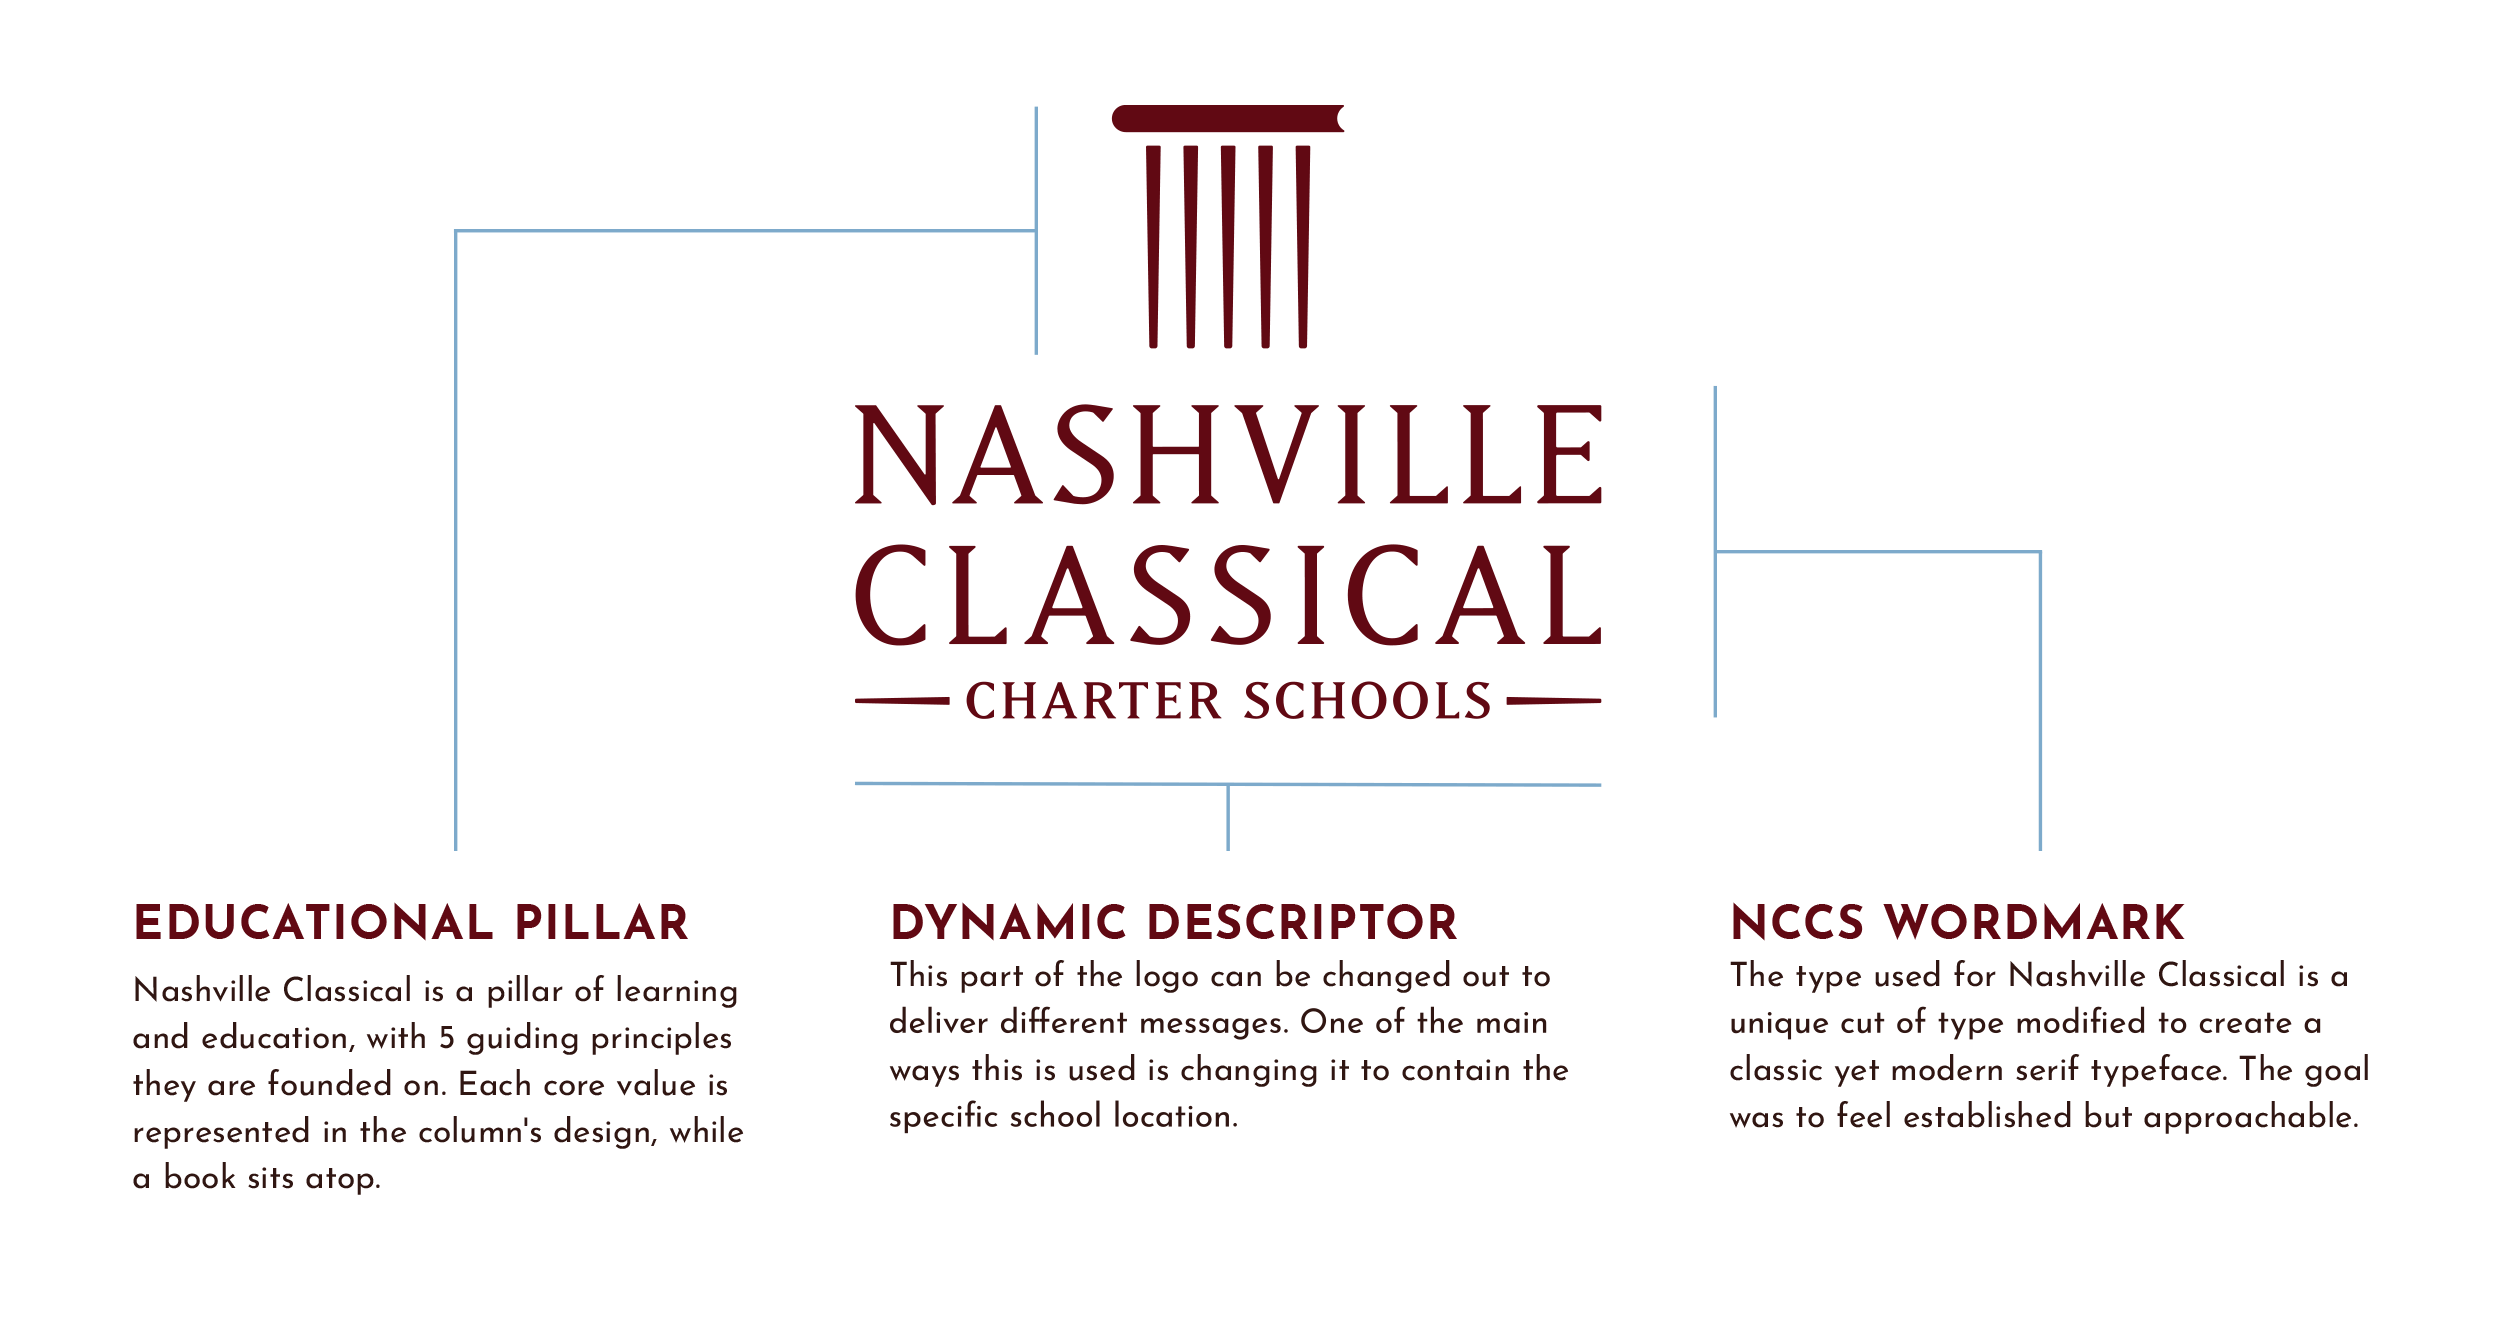 Logo anatomy of Nashville Classical Charter School identity as part of brand refresh designed by ST8MNT. The anatomy reads: 